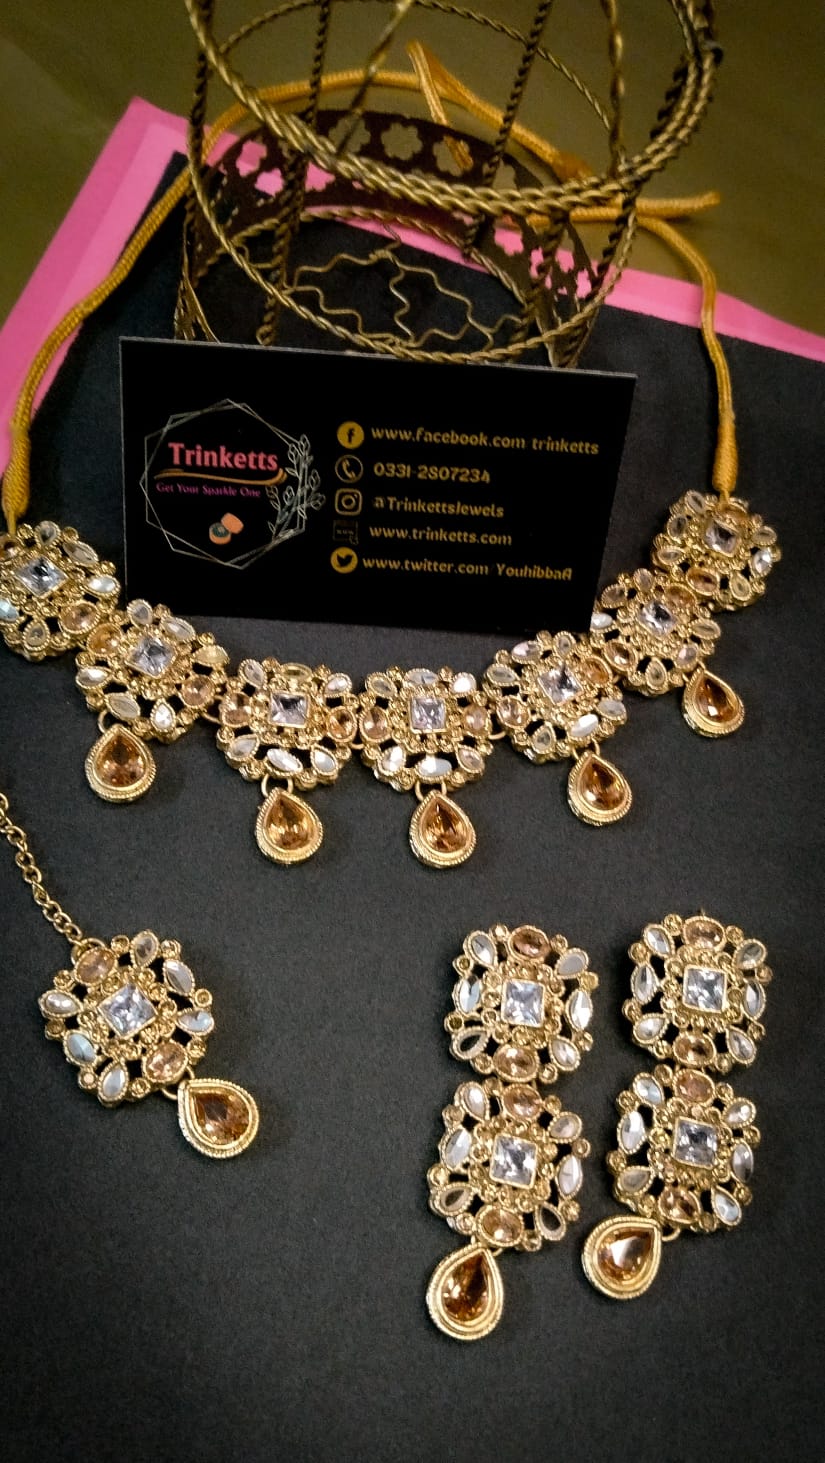 Exquisite Jewelry Set with Transparent and Champagne Stones on geometric pattrens having Teeka, Earrings, and Neckpiece"